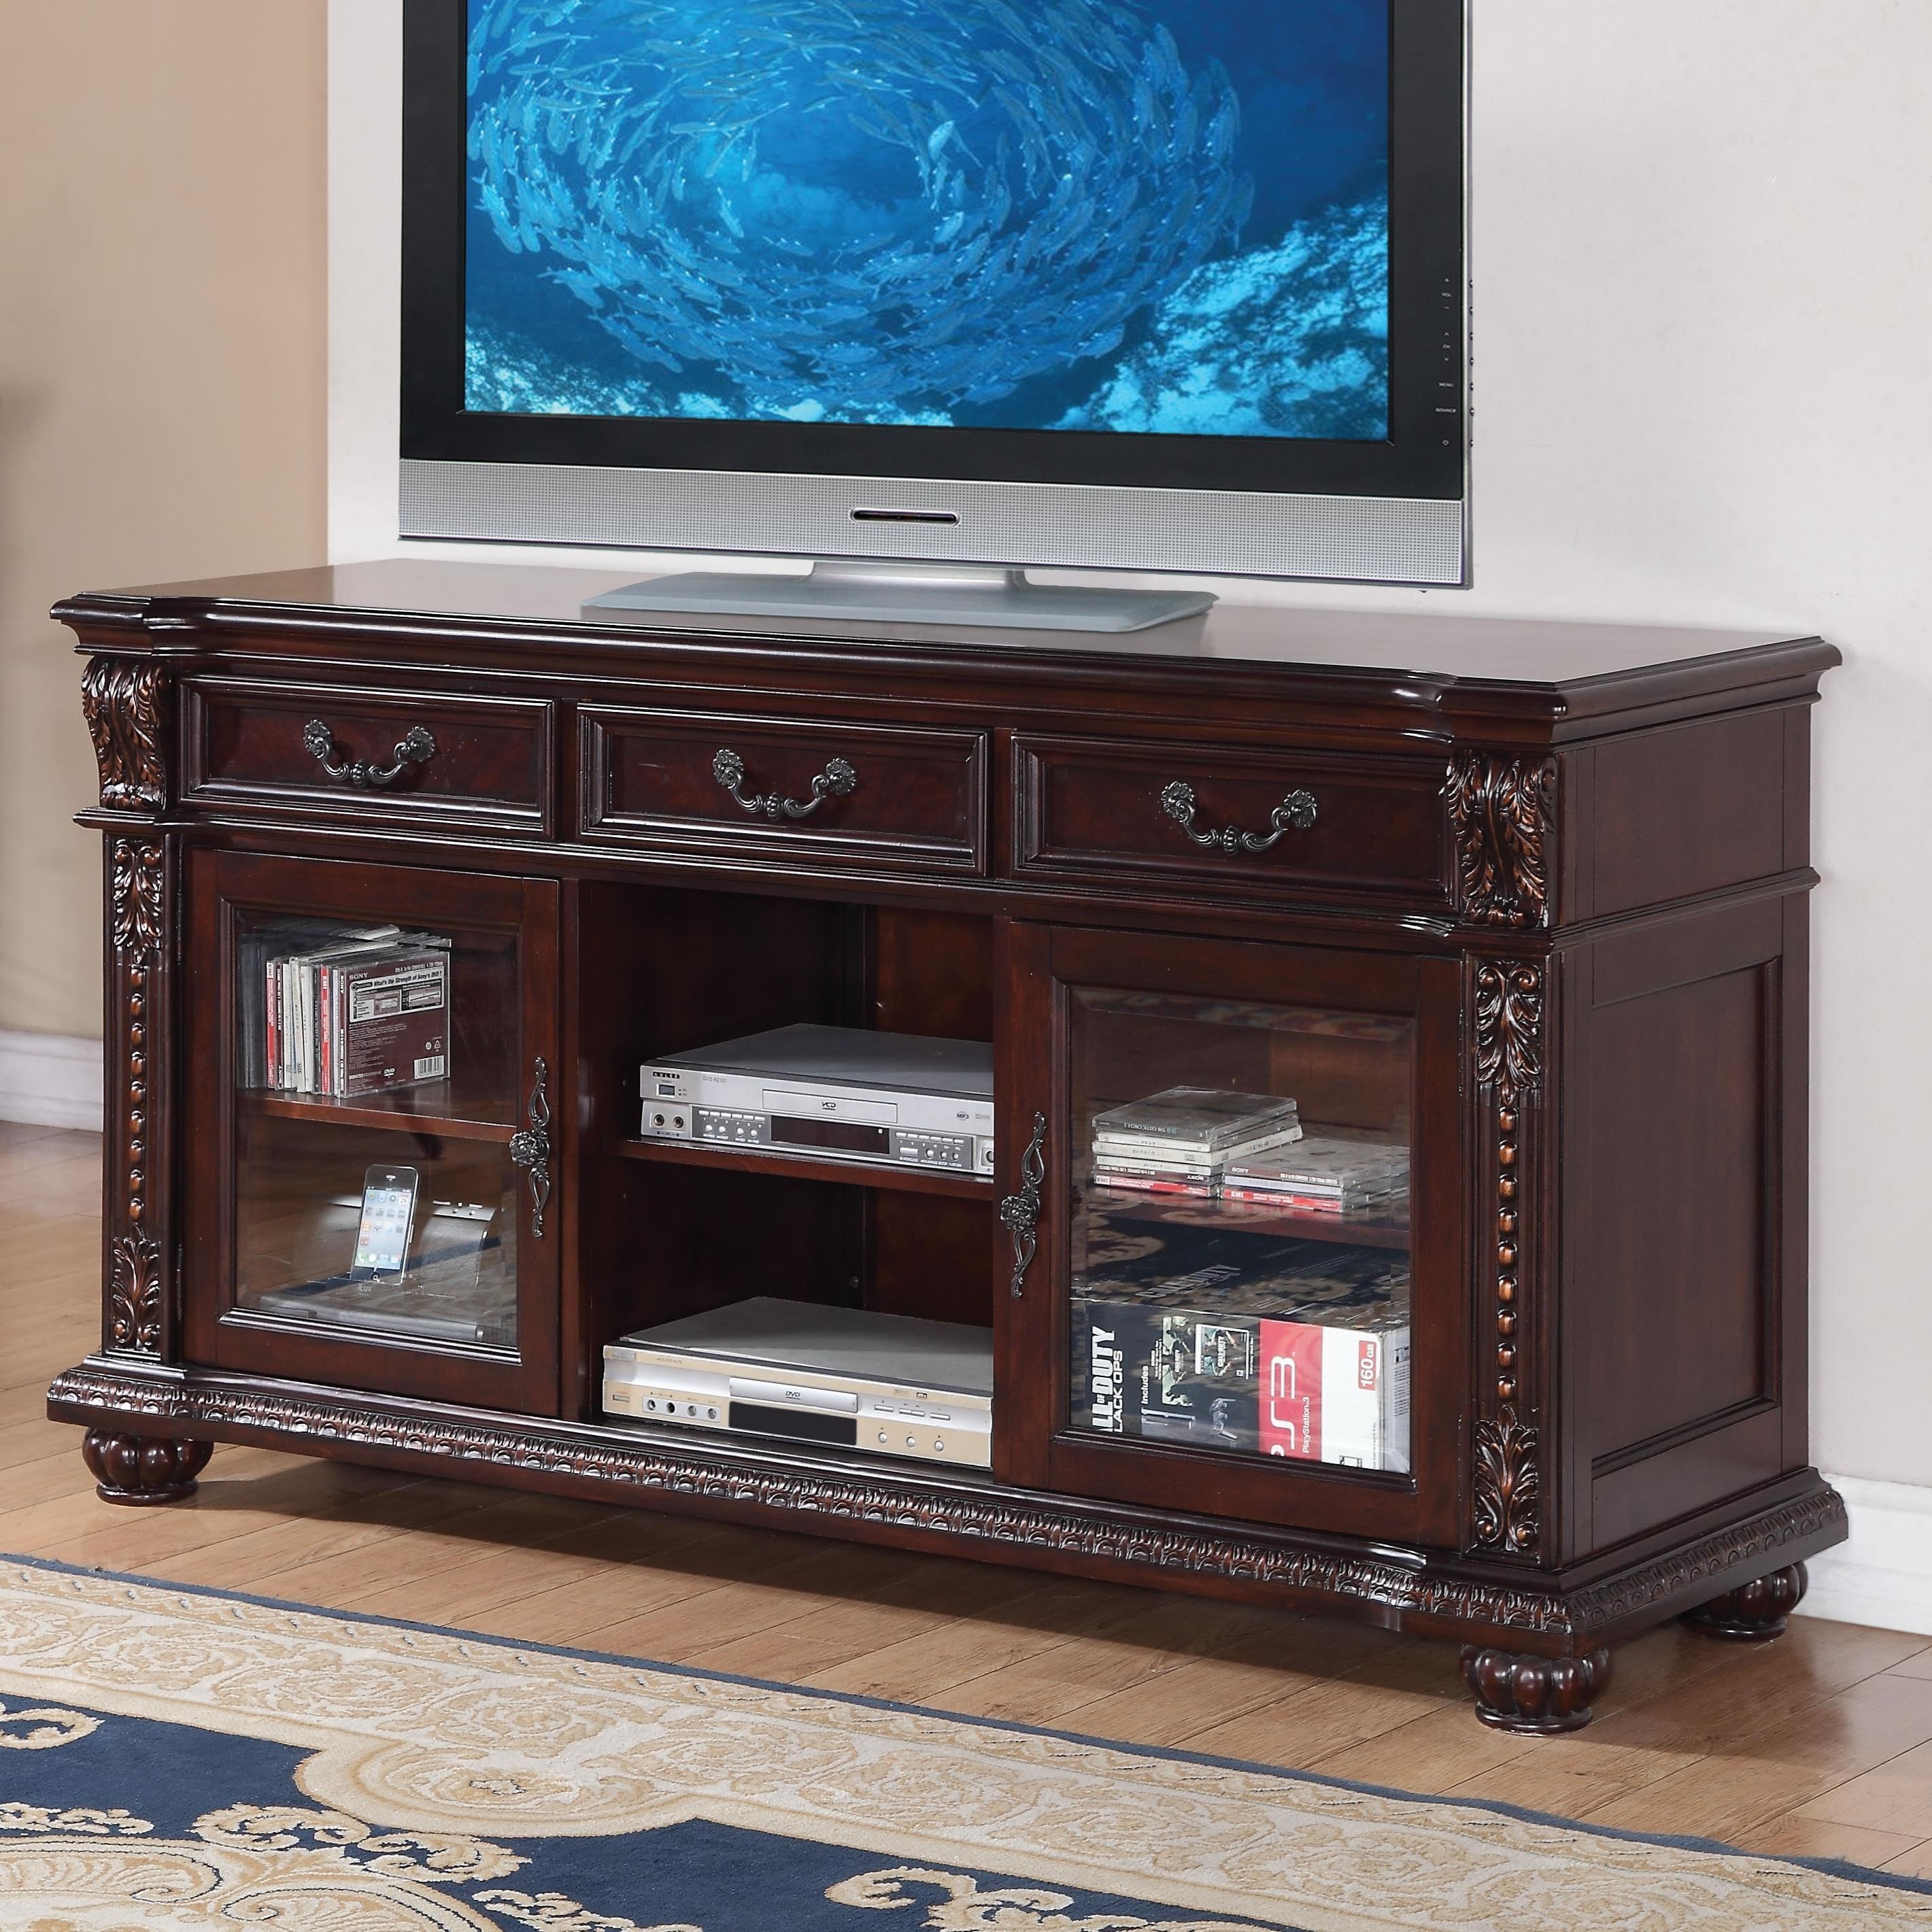 Acme Furniture Anondale 10321 Traditional TV Stand with Glass 